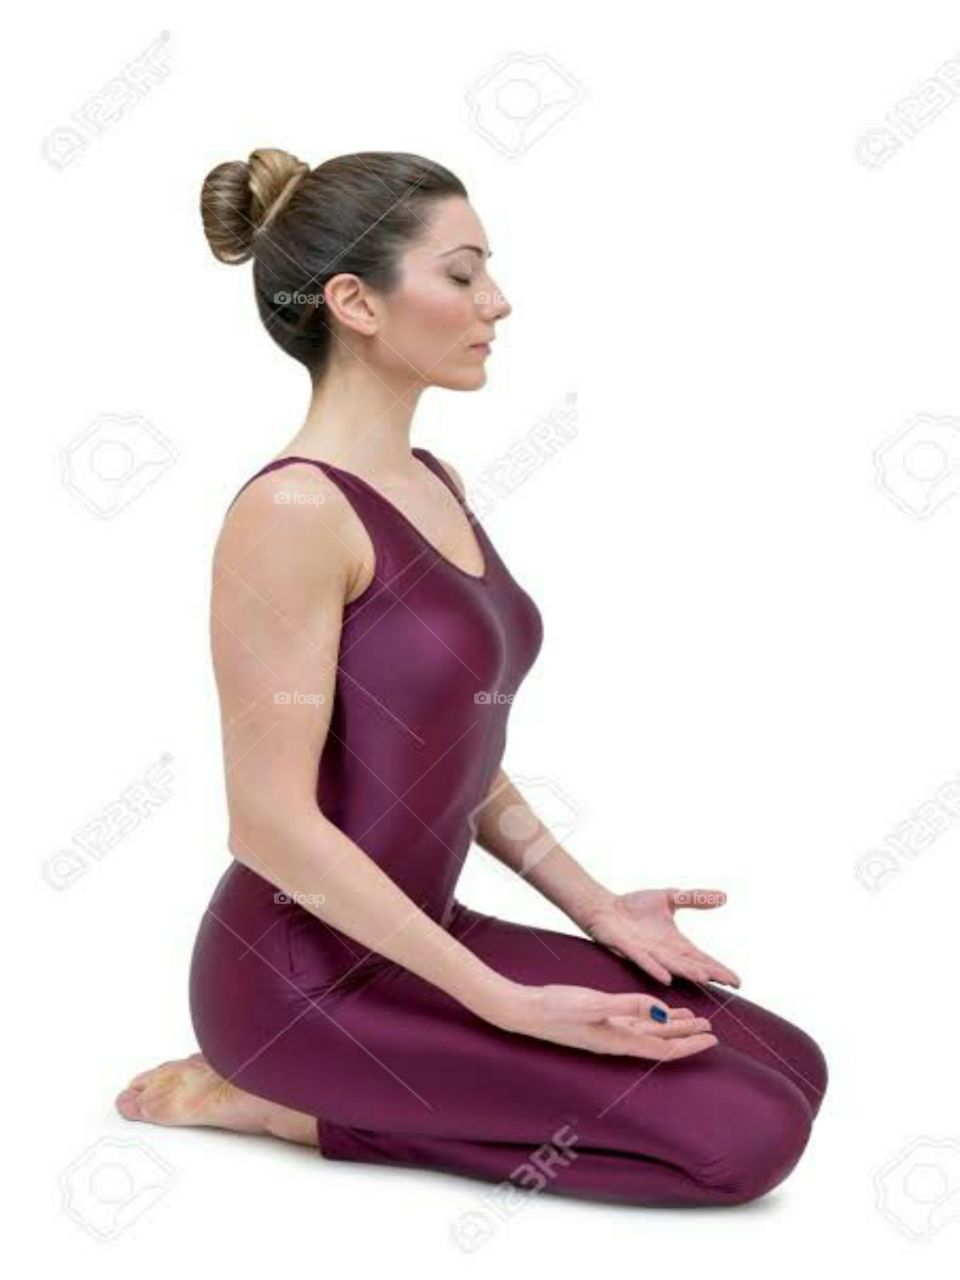 DStretches: Knee, Thigh, Hip, Ankle

Do after food because it provides to relief and pachan.
Also known as: Adamantine pose, Pelvic pose, Thunderbolt pose, Diamond pose, 